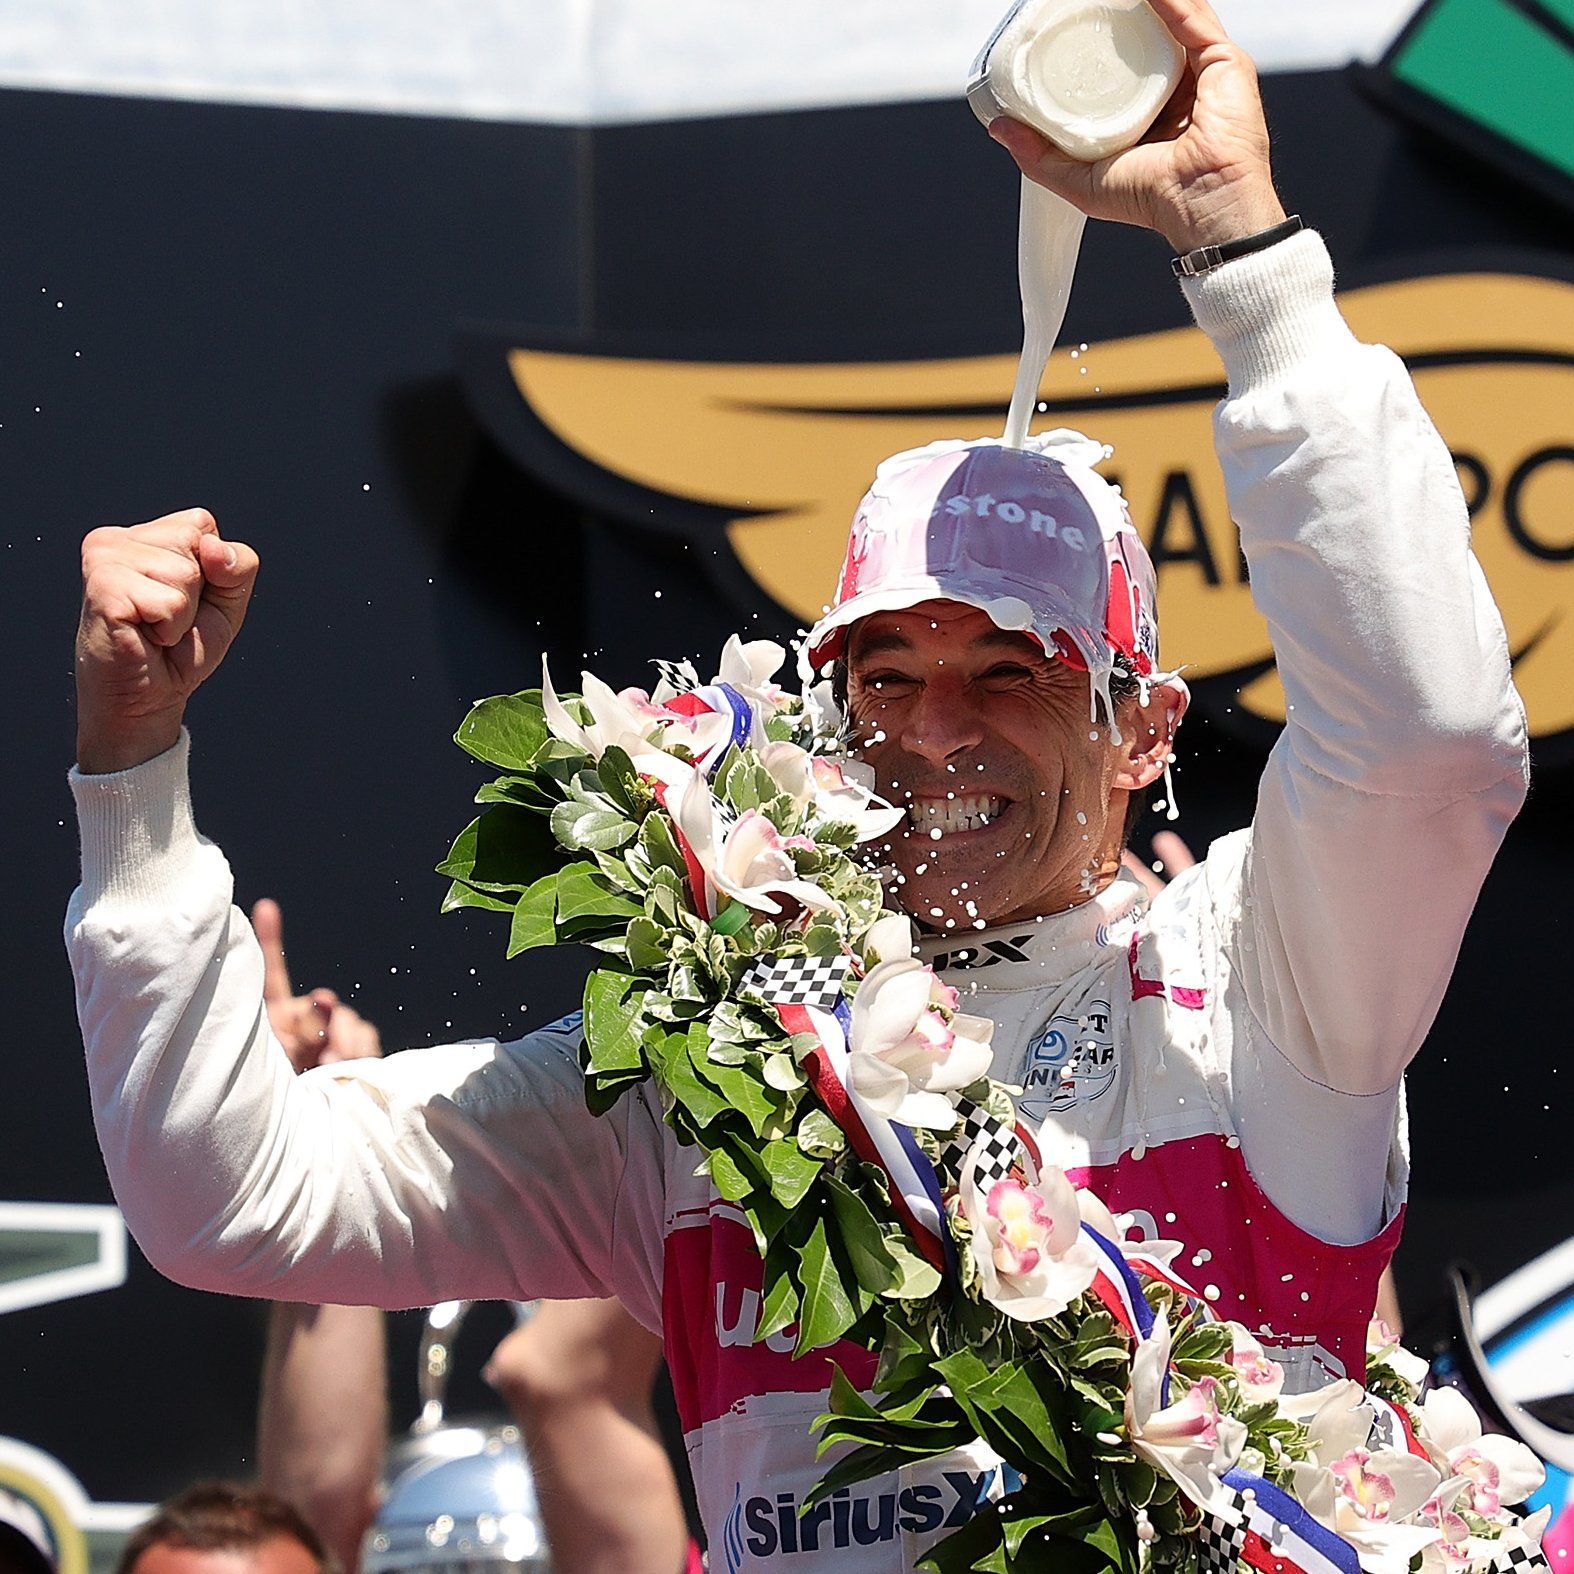 Helio Castroneves wins fourth career Indianapolis 500 title